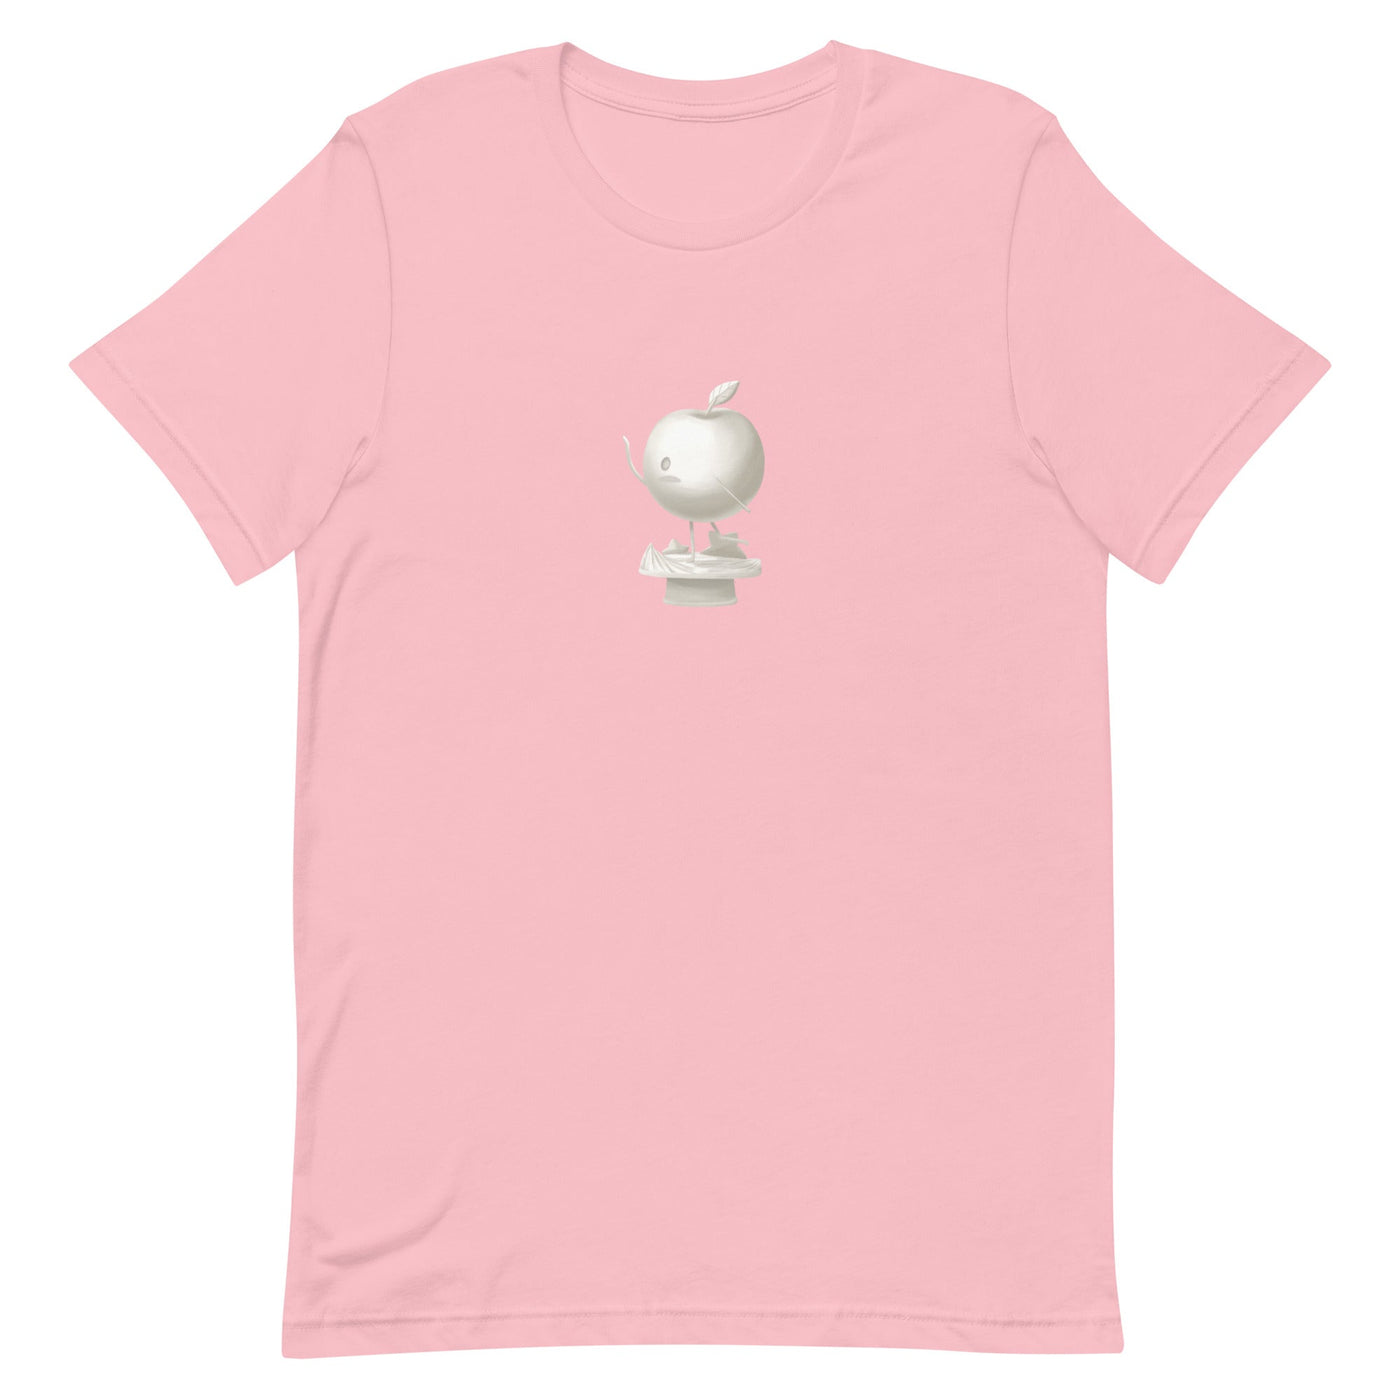 Michelangelo Junimo | Short-Sleeve Unisex T-Shirt | Stardew Valley Threads and Thistles Inventory Pink S 